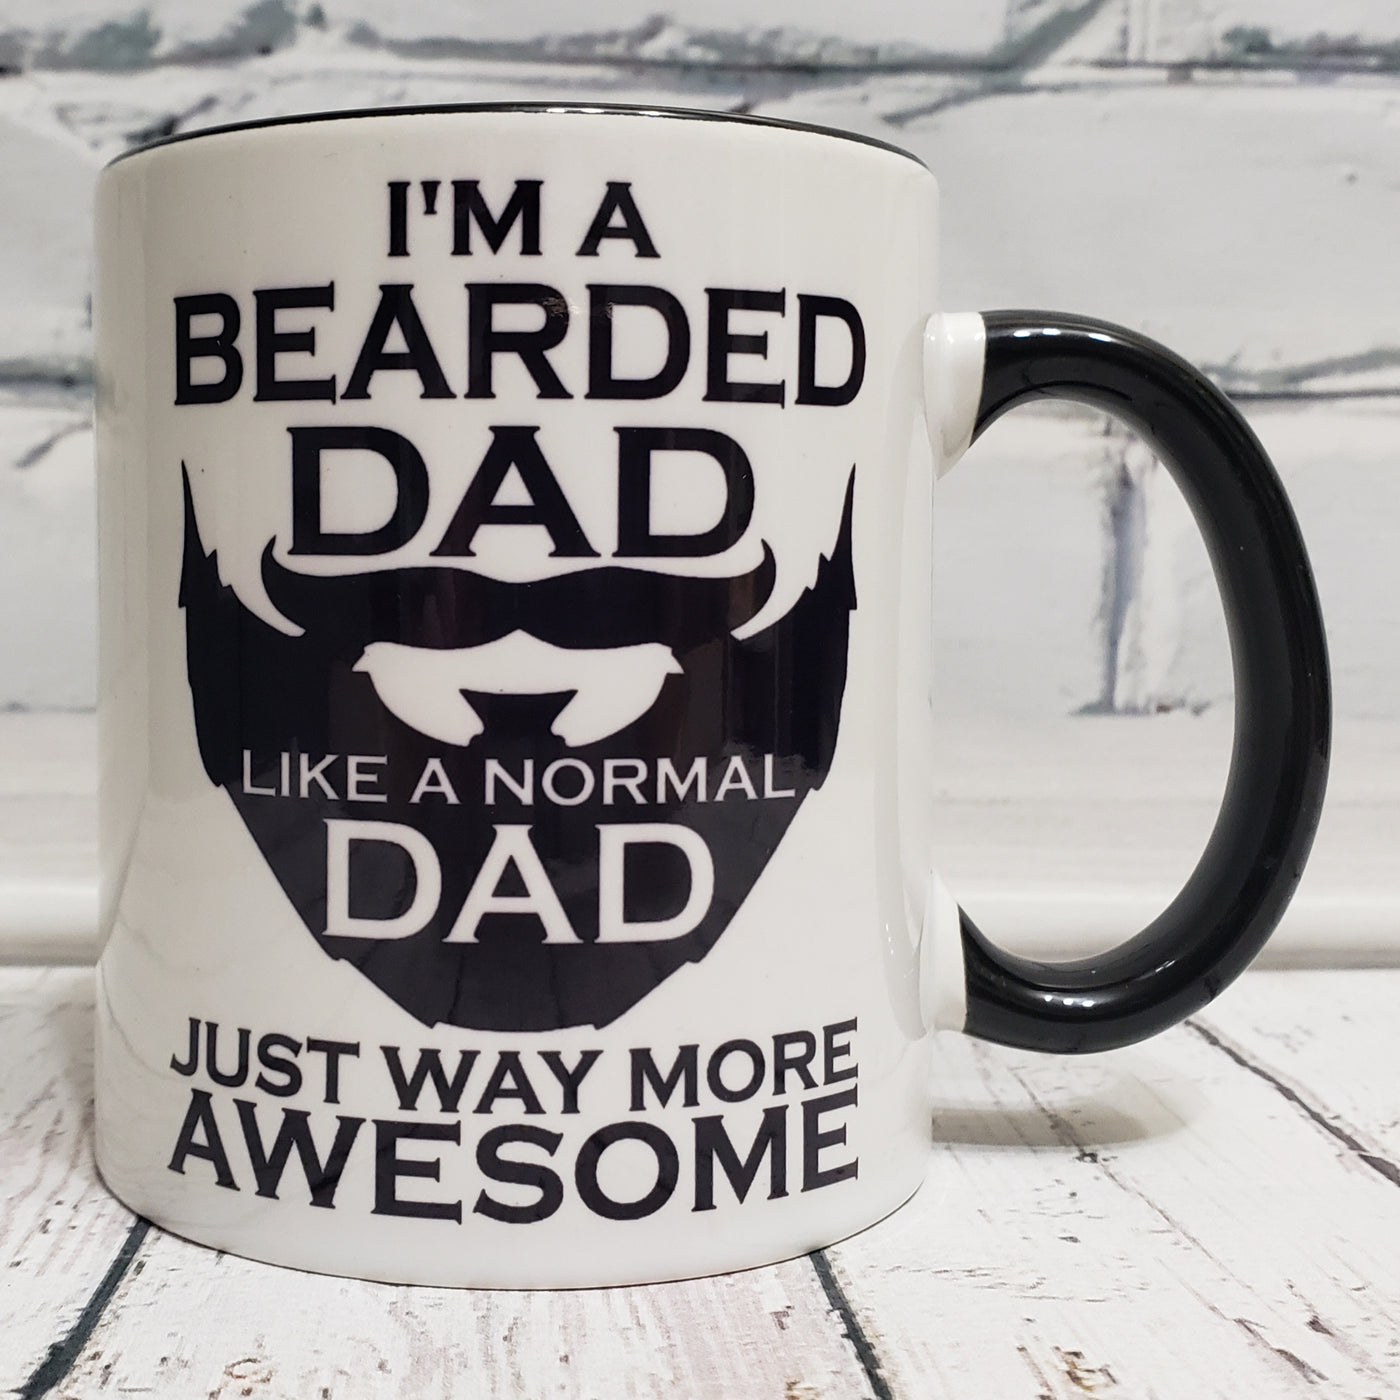 I'm a Bearded Dad, Just Like a Regular Dad But More Awesome.